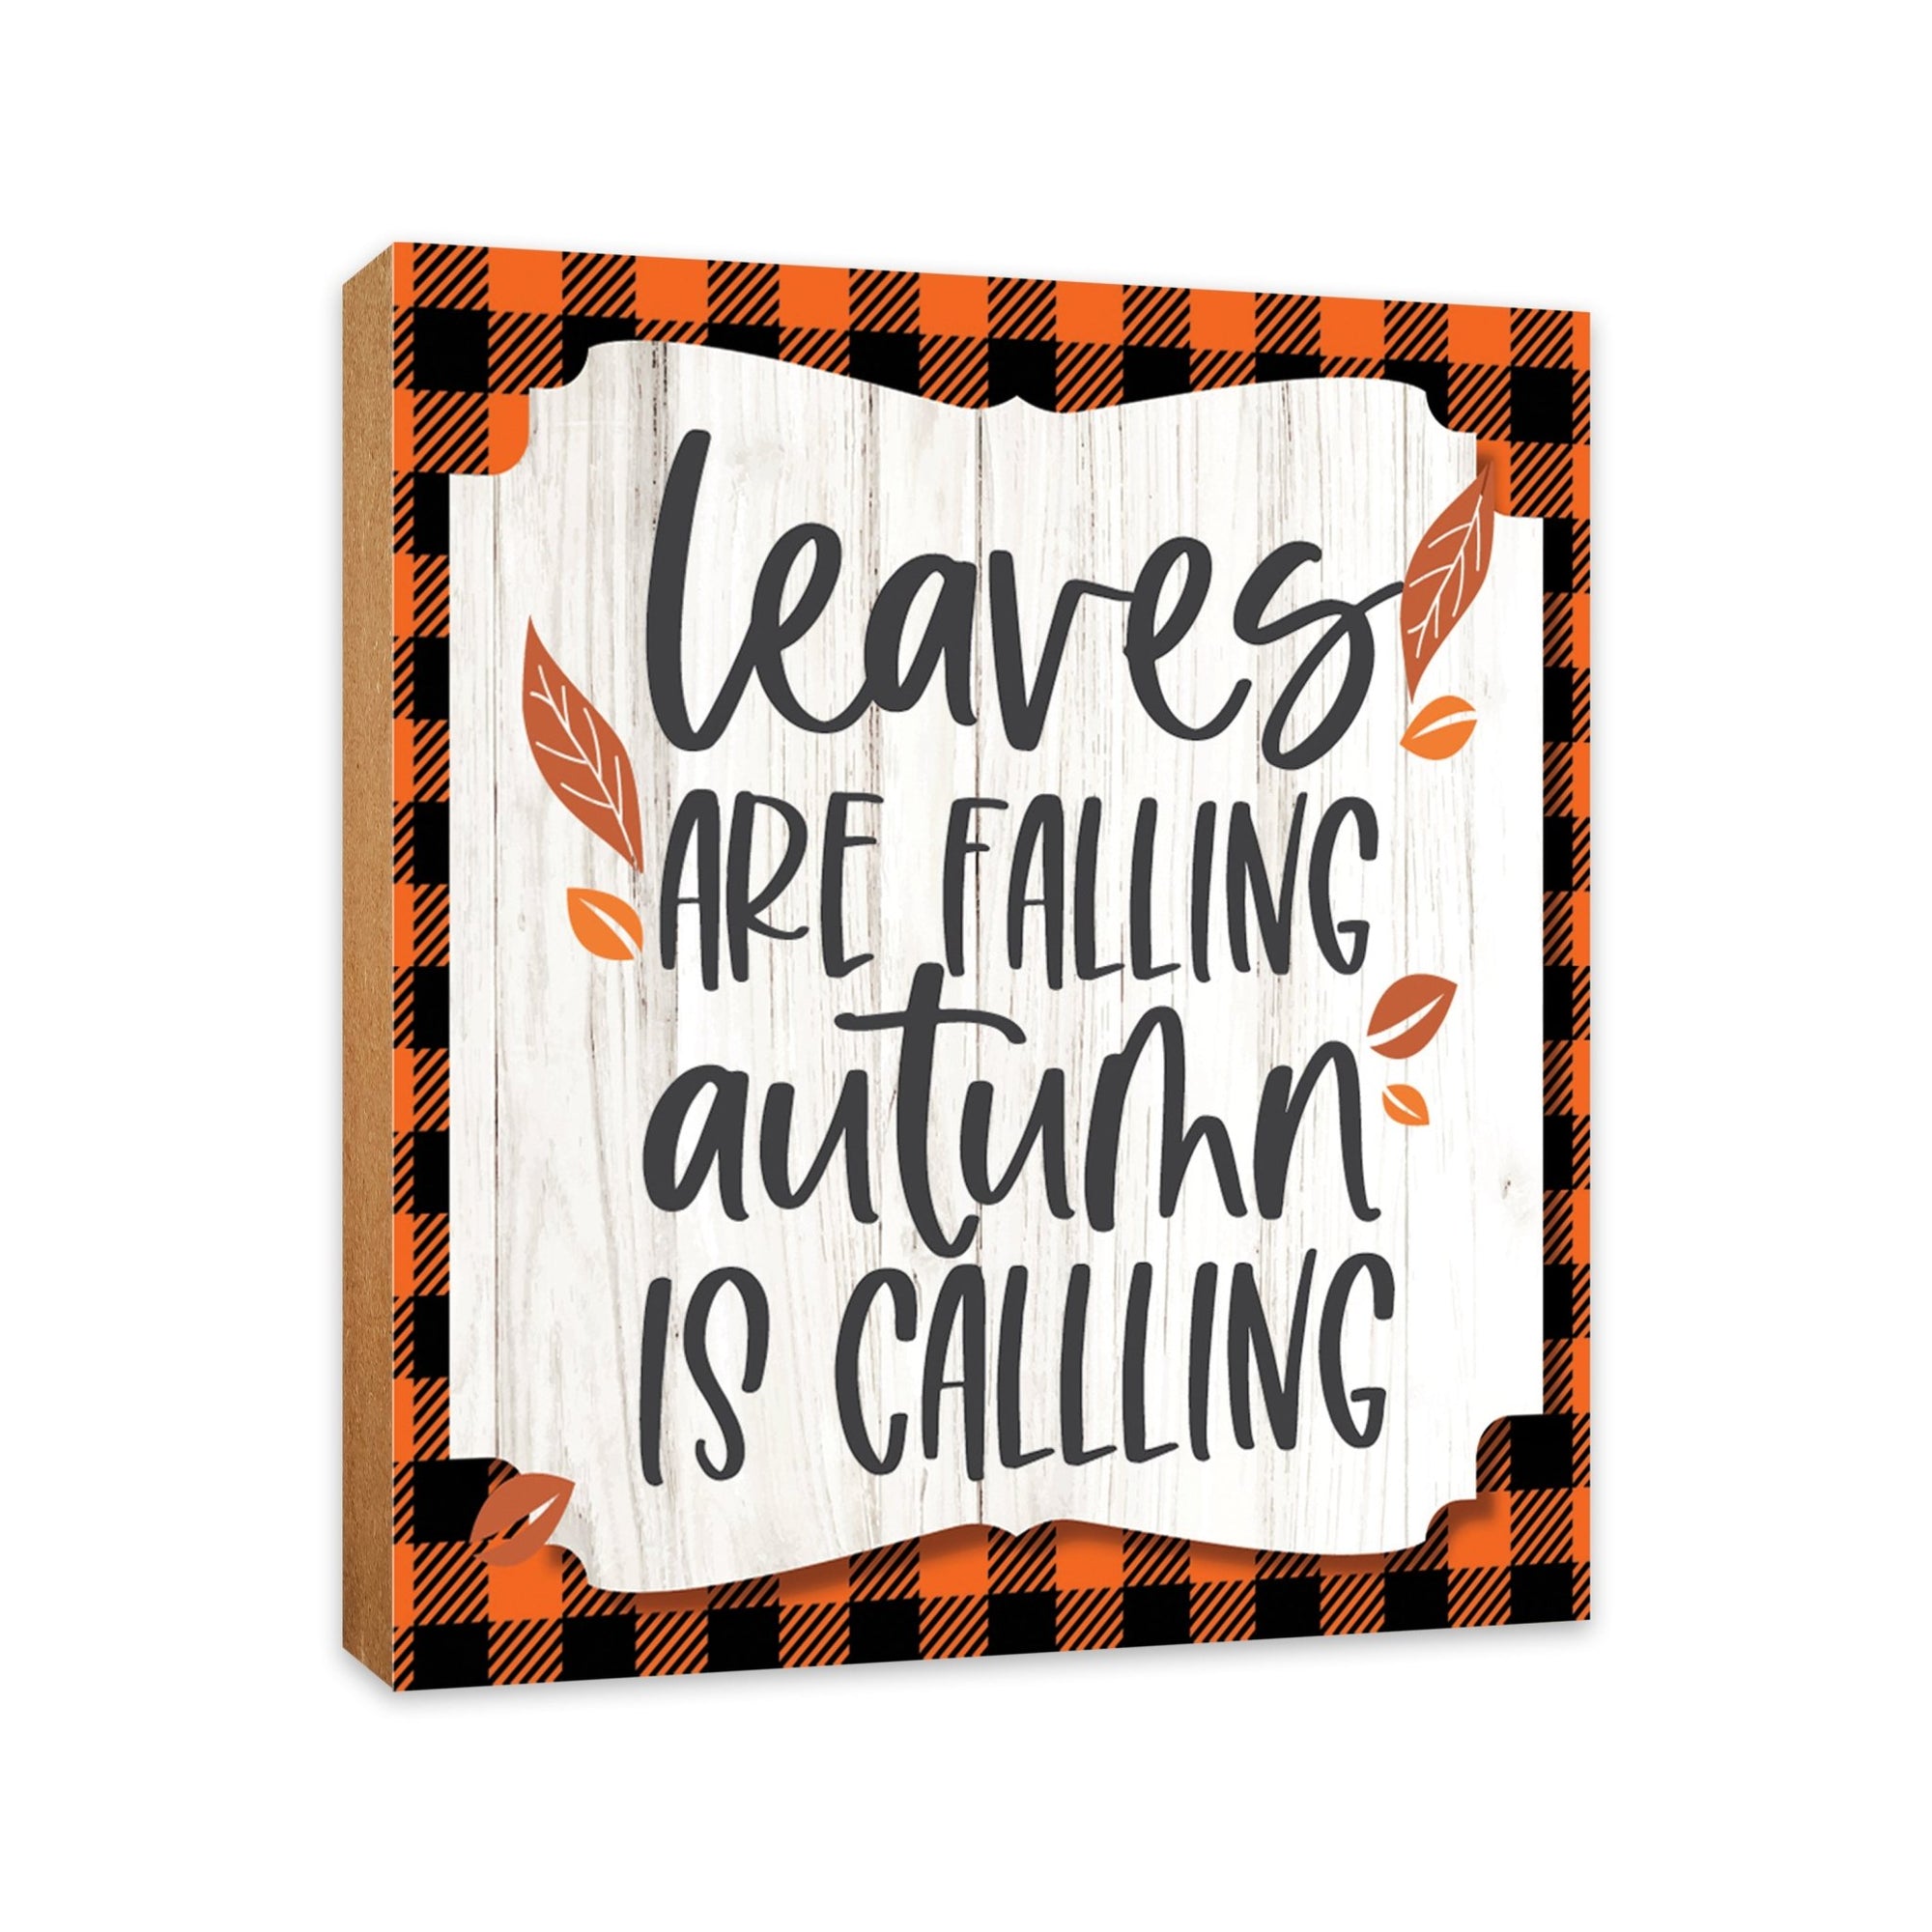 A close-up of a wooden tabletop adorned with inspirational fall signs, enhancing your home decor